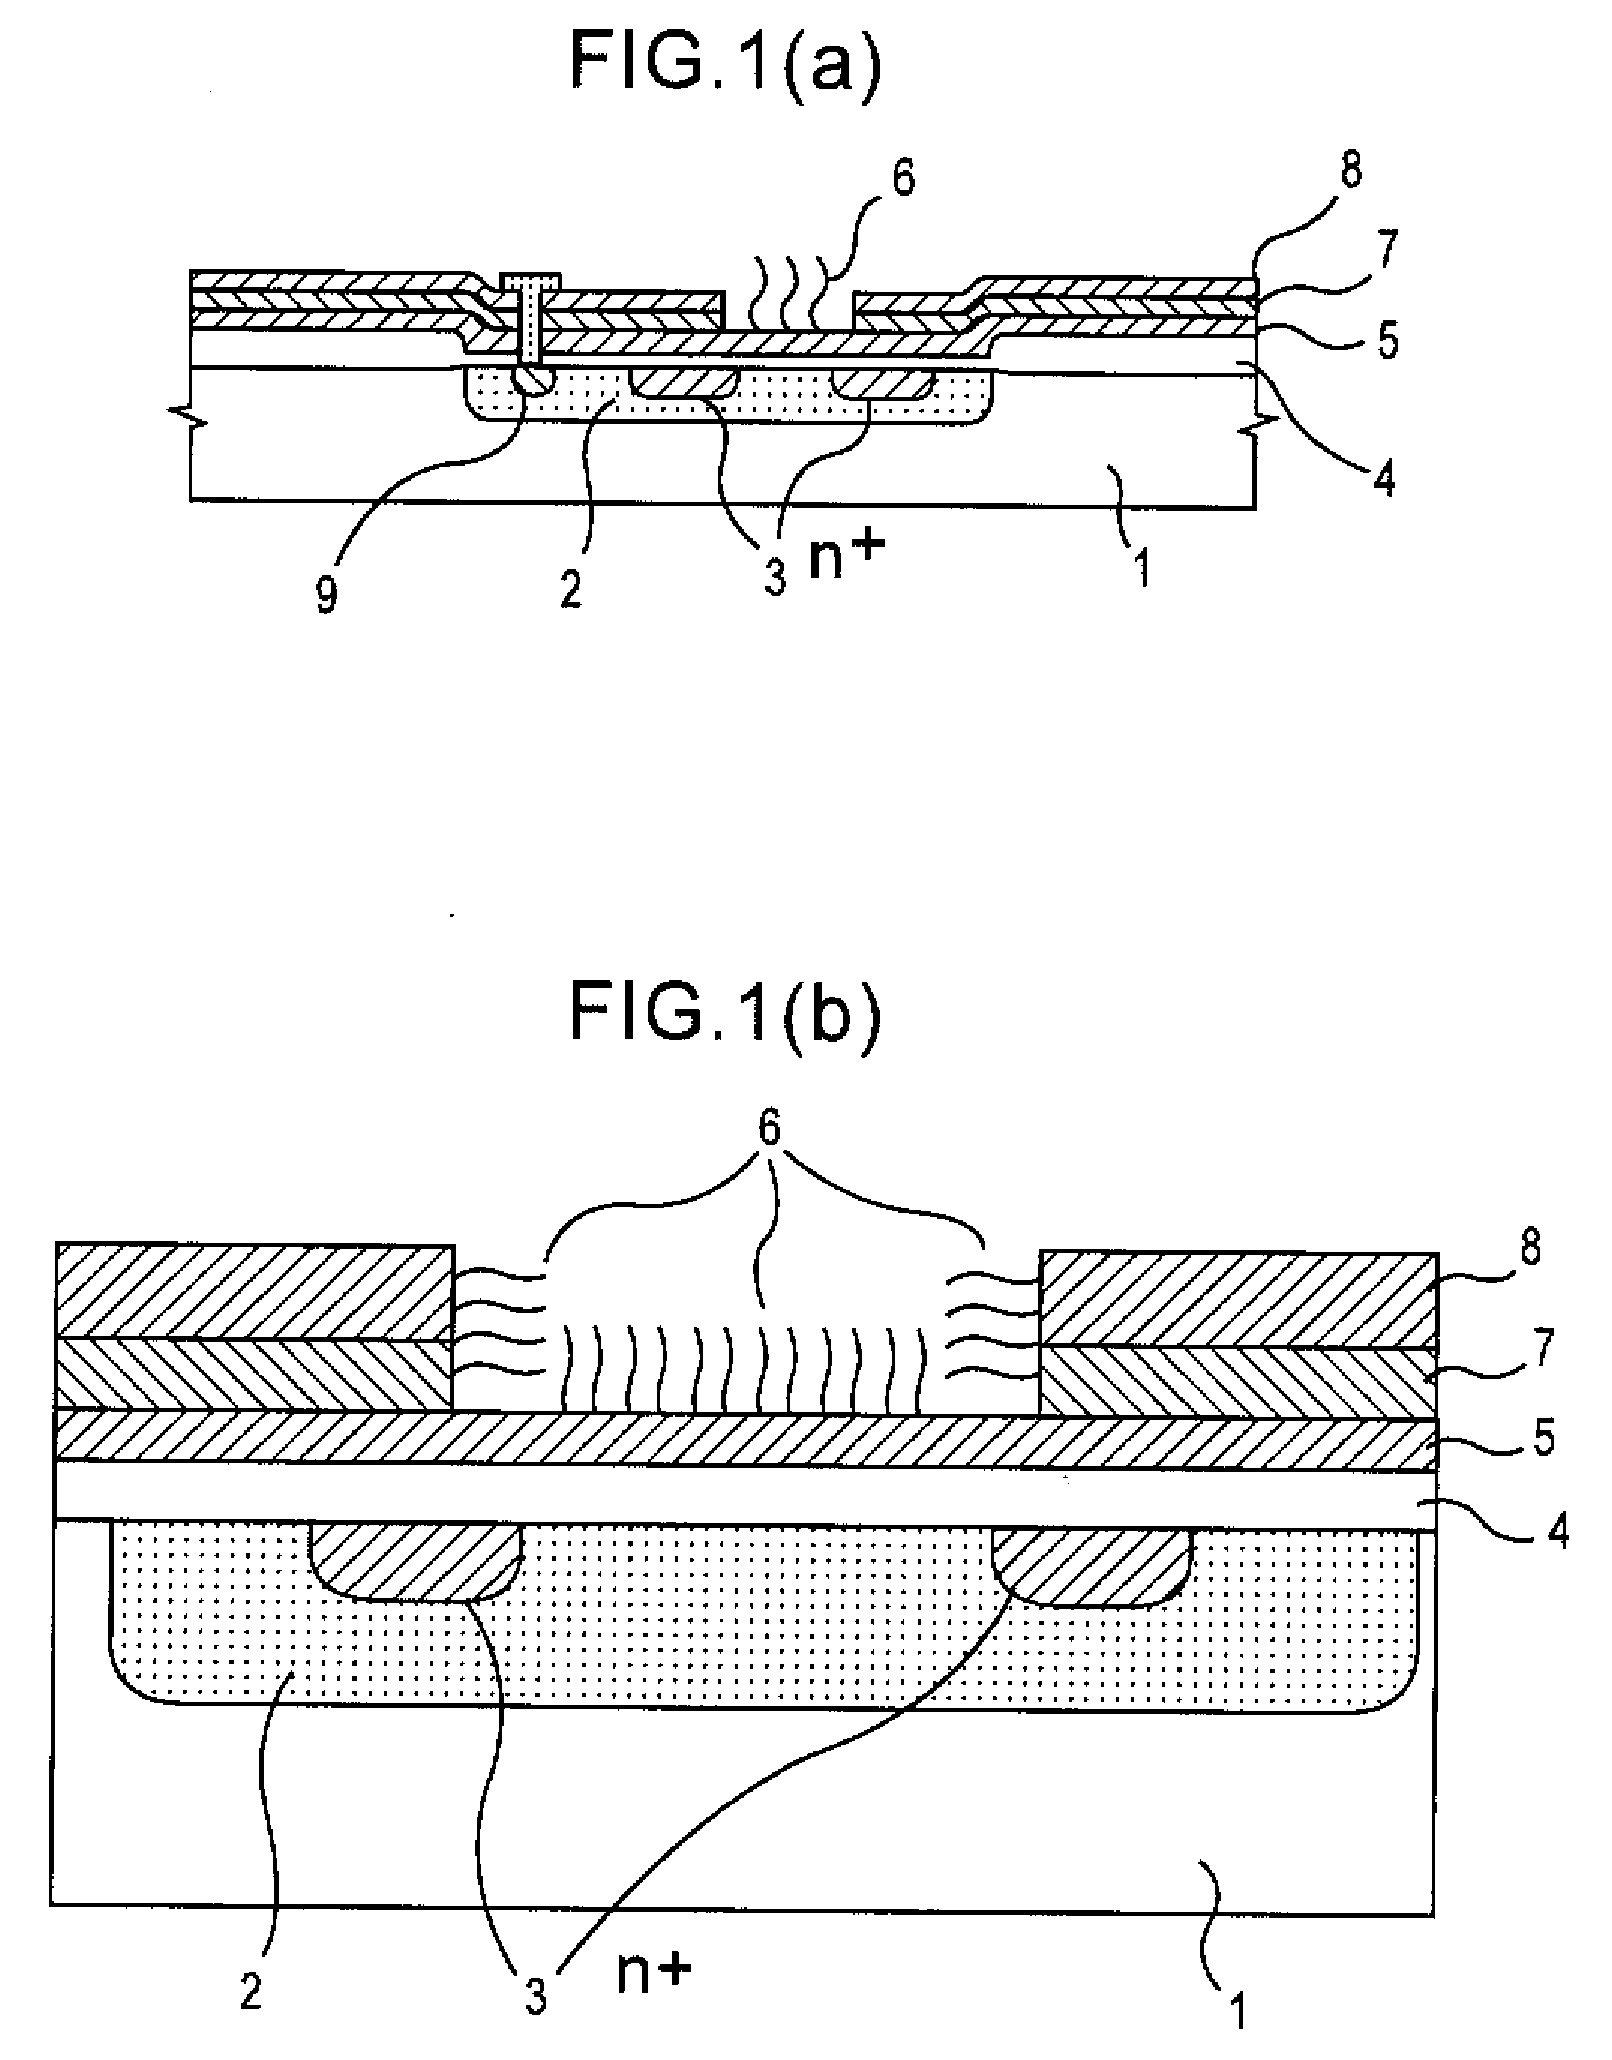 Method of Analyzing Dna Sequence Using Field-Effect Device, and Base Sequence Analyzer